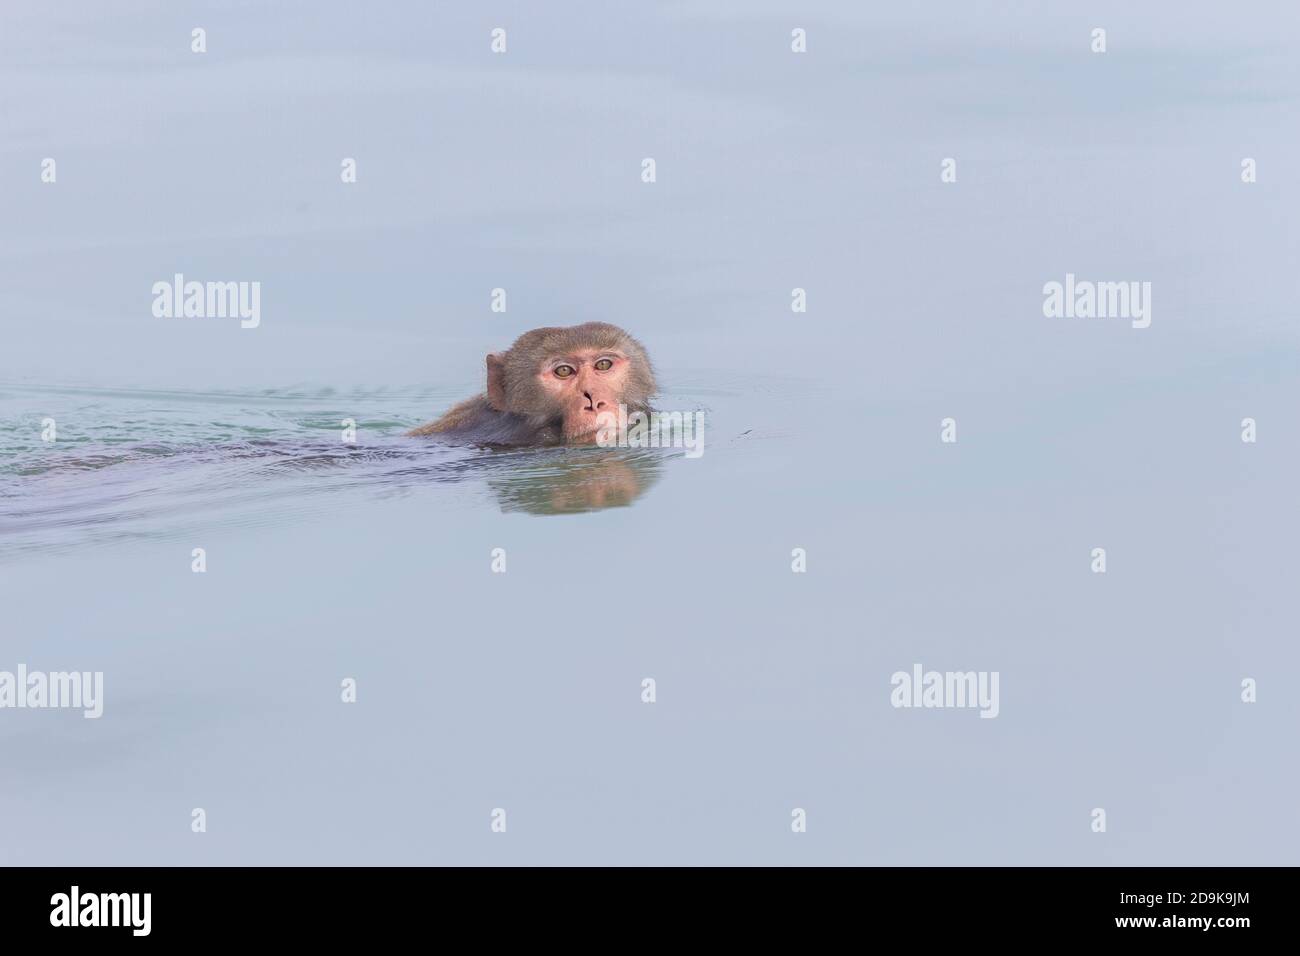 Adult male rhesus monkey with a cut nose swimming in deep waters of Sundarban National Park, West Bengal, India Stock Photo